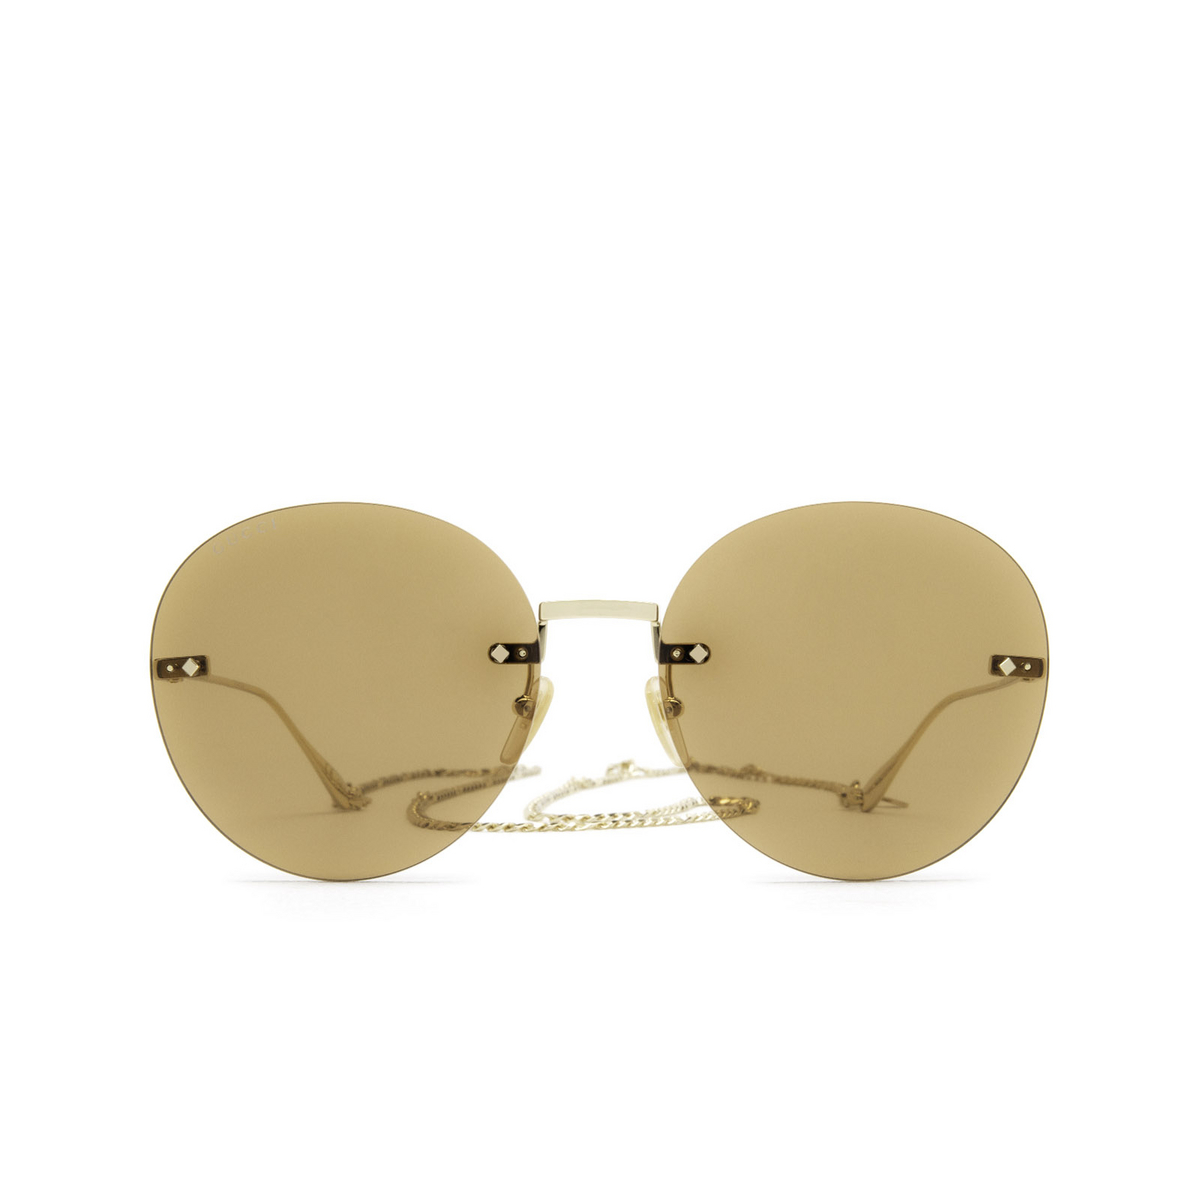 Gucci® Round Sunglasses: GG1149S color 003 Gold - front view